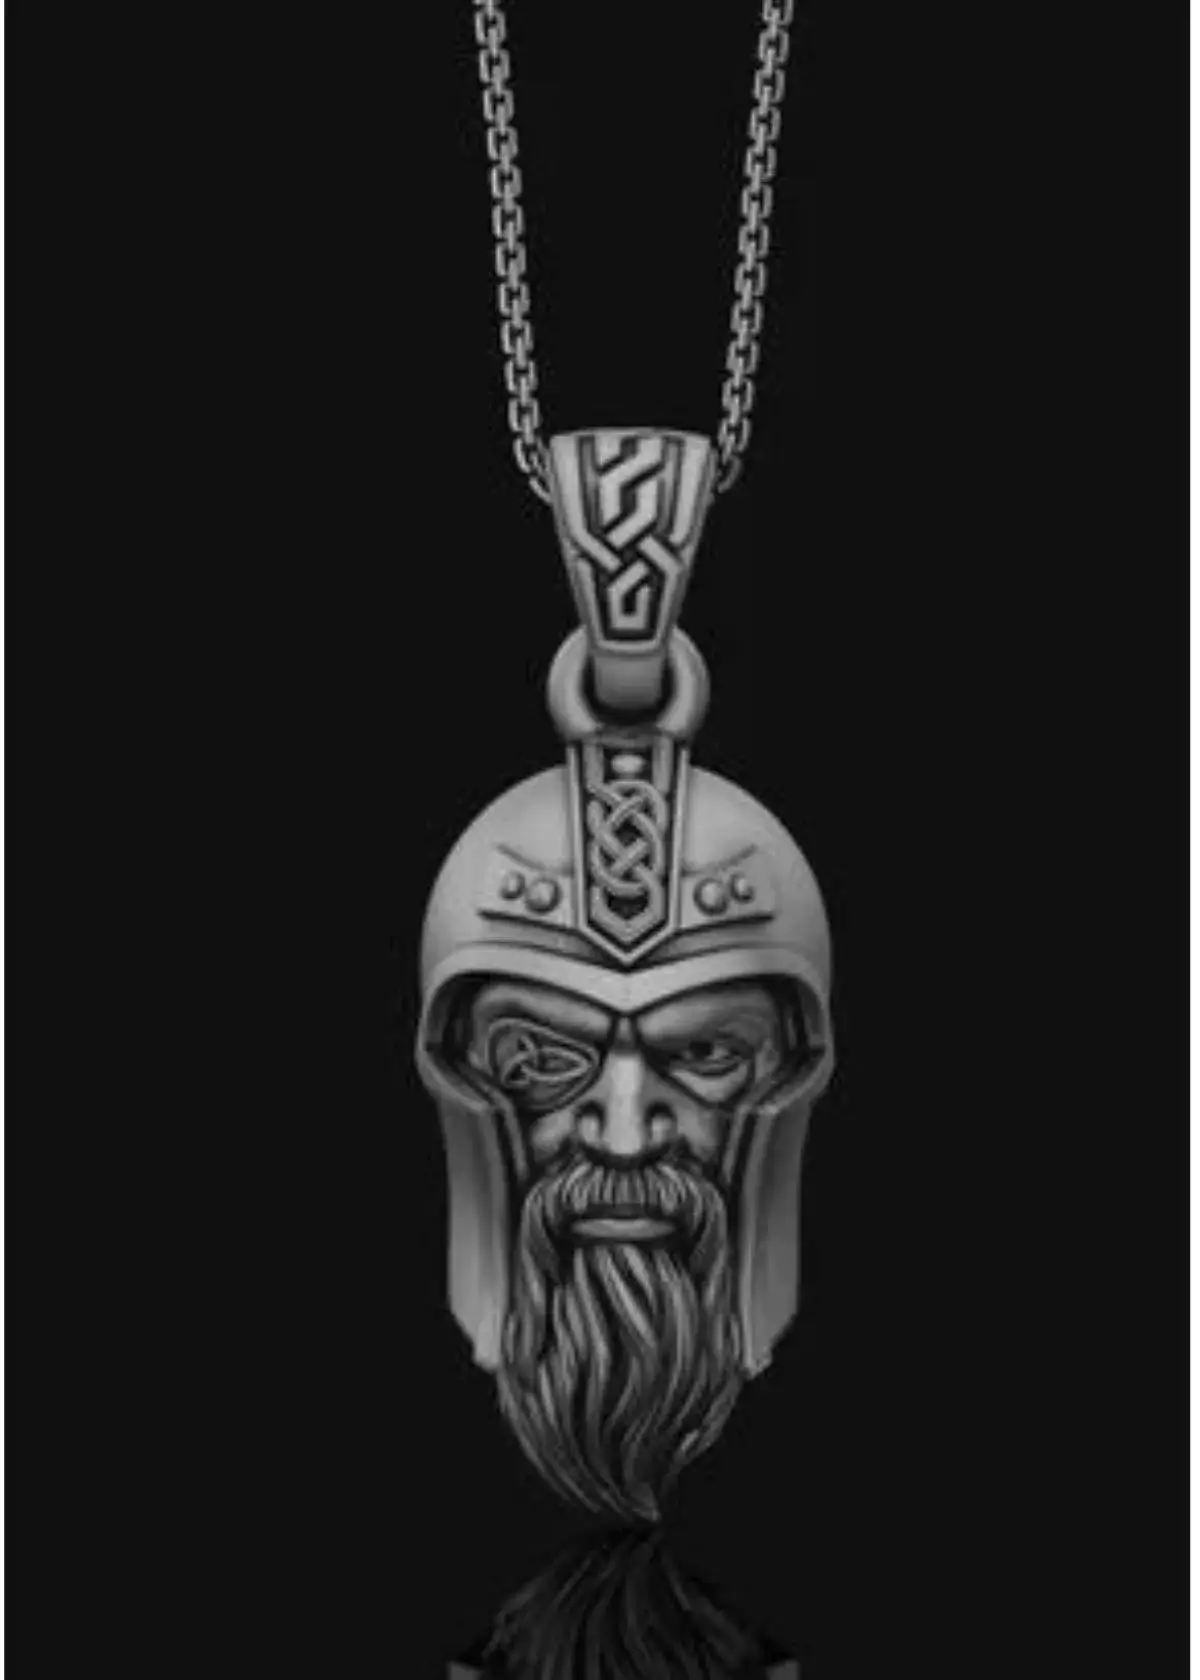 How do I Clean and Maintain My Odin Necklace?